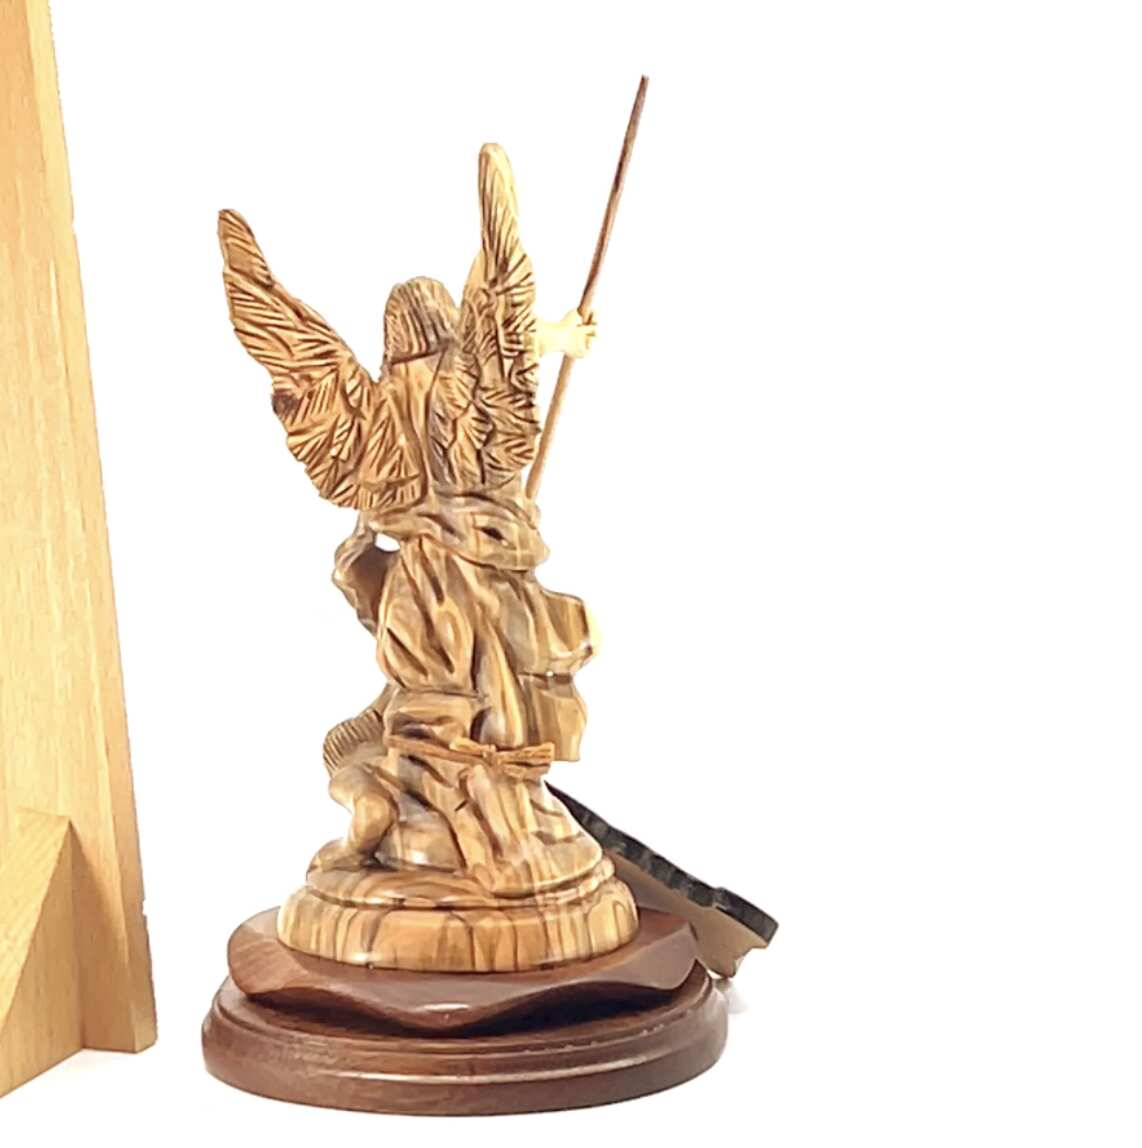 Archangel Michael Sculpture with Wings, 6.9" Carving from Olive Wood